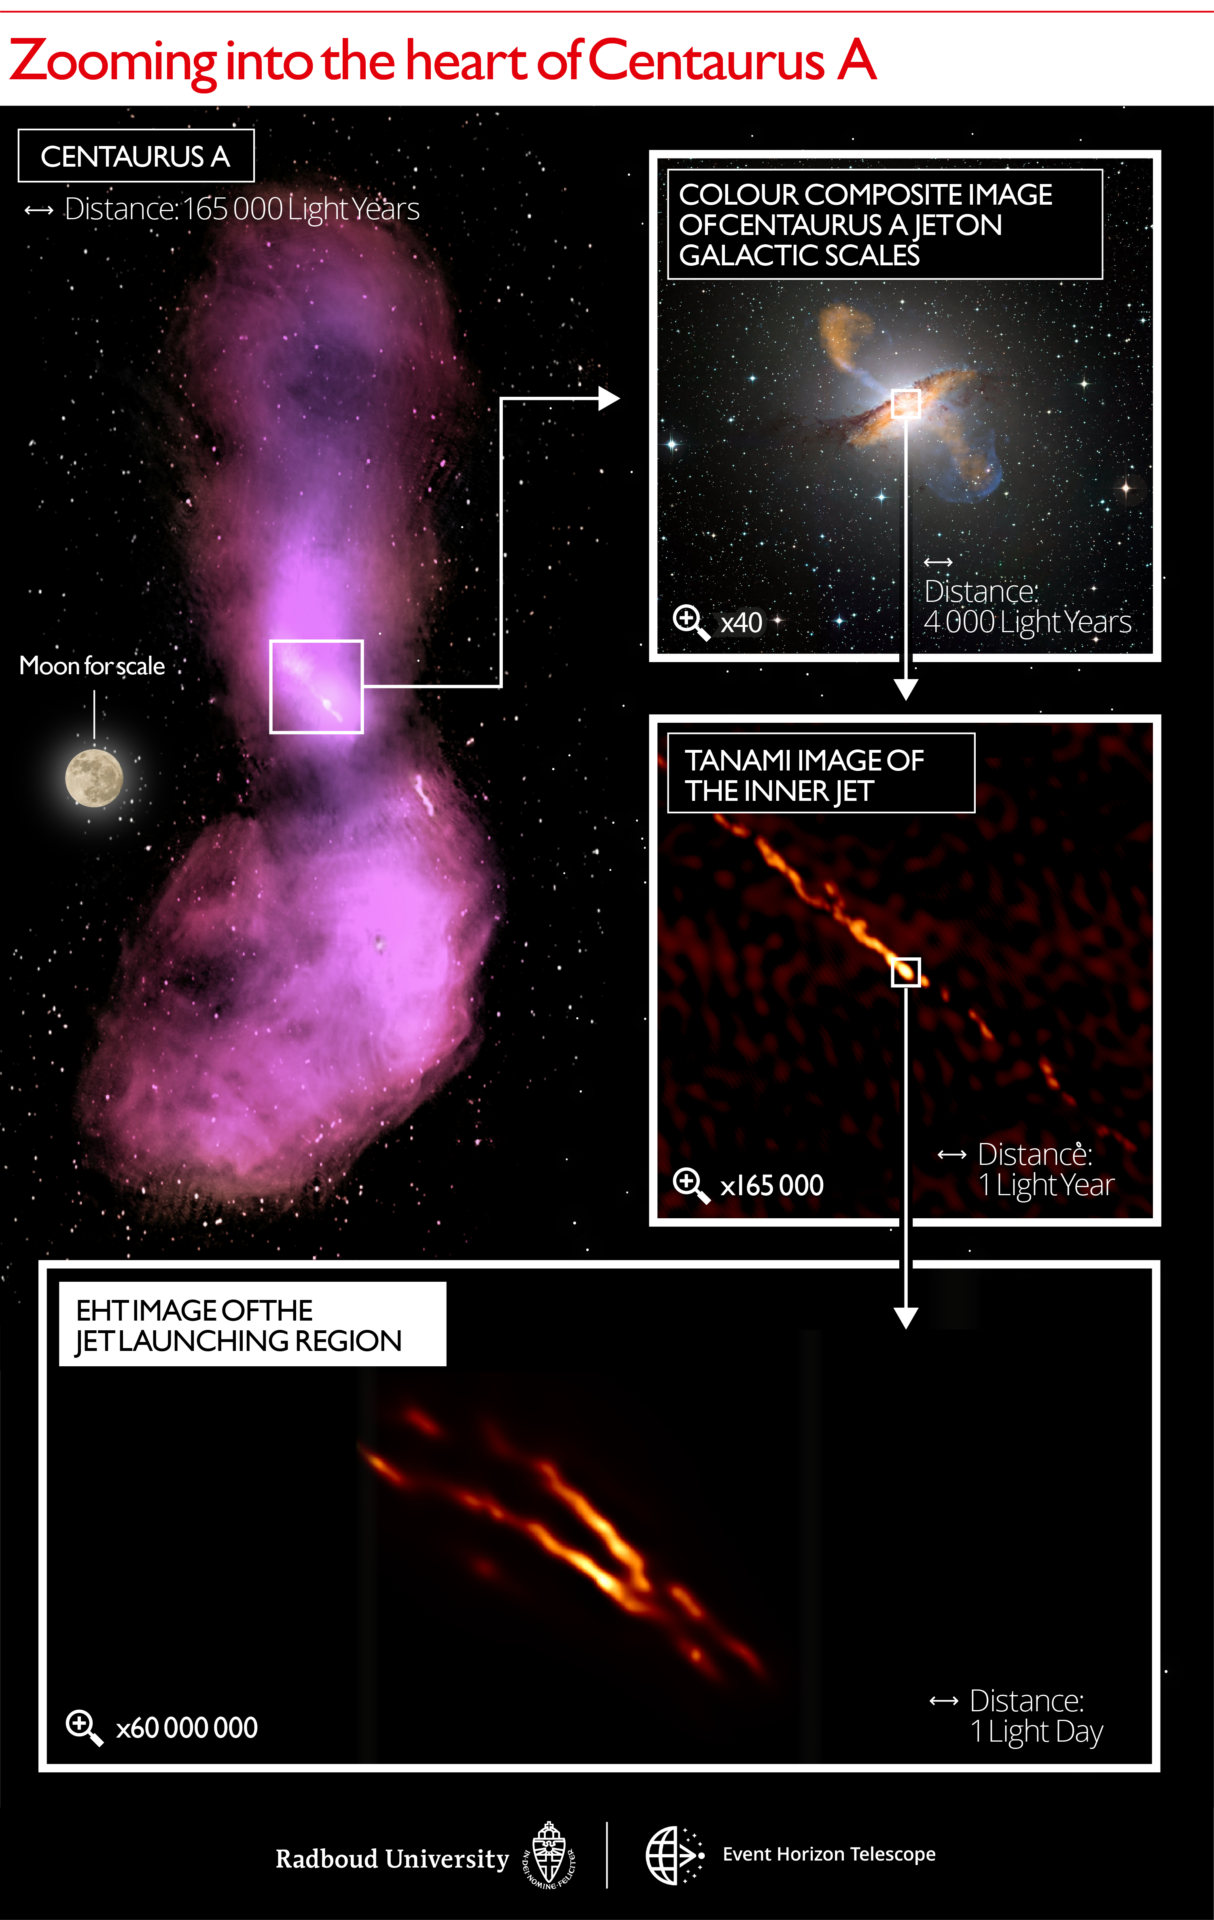 <p>Distance scales uncovered in the Centaurus A jet. The top left image shows how the jet disperses into gas clouds that emit radio waves, captured by the ATCA and Parkes observatories. The top right panel displays a color composite image, with a 40x zoom compared to the first panel to match the size of the galaxy itself. Submillimeter emission from the jet and dust in the galaxy measured by the LABOCA/APEX instrument is shown in orange. X-ray emission from the jet measured by the Chandra spacecraft is shown in blue. Visible white light from the stars in the galaxy has been captured by the MPG/ESO 2.2-metre telescope. The next panel below shows a 165000x zoom image of the inner radio jet obtained with the TANAMI telescopes.  The bottom panel depicts the new highest resolution image of the jet launching region obtained with the EHT at millimeter wavelengths with a 60000000x zoom in telescope resolution. Indicated scale bars are shown in light years and light days. One light year is equal to the distance that light travels within one year: about nine trillion kilometers. In comparison, the distance to the nearest-known star from our Sun is approximately four light years. One light day is equal to the distance that light travels within one day: about six times the distance between the Sun and Neptune. Credit: Radboud University; CSIRO/ATNF/I.Feain et al., R.Morganti et al., N.Junkes et al.; ESO/WFI; MPIfR/ESO/APEX/A. Weiss et al.; NASA/CXC/CfA/R. Kraft et al.; TANAMI/C. Mueller et al.; EHT/M. Janssen et al.</p>
